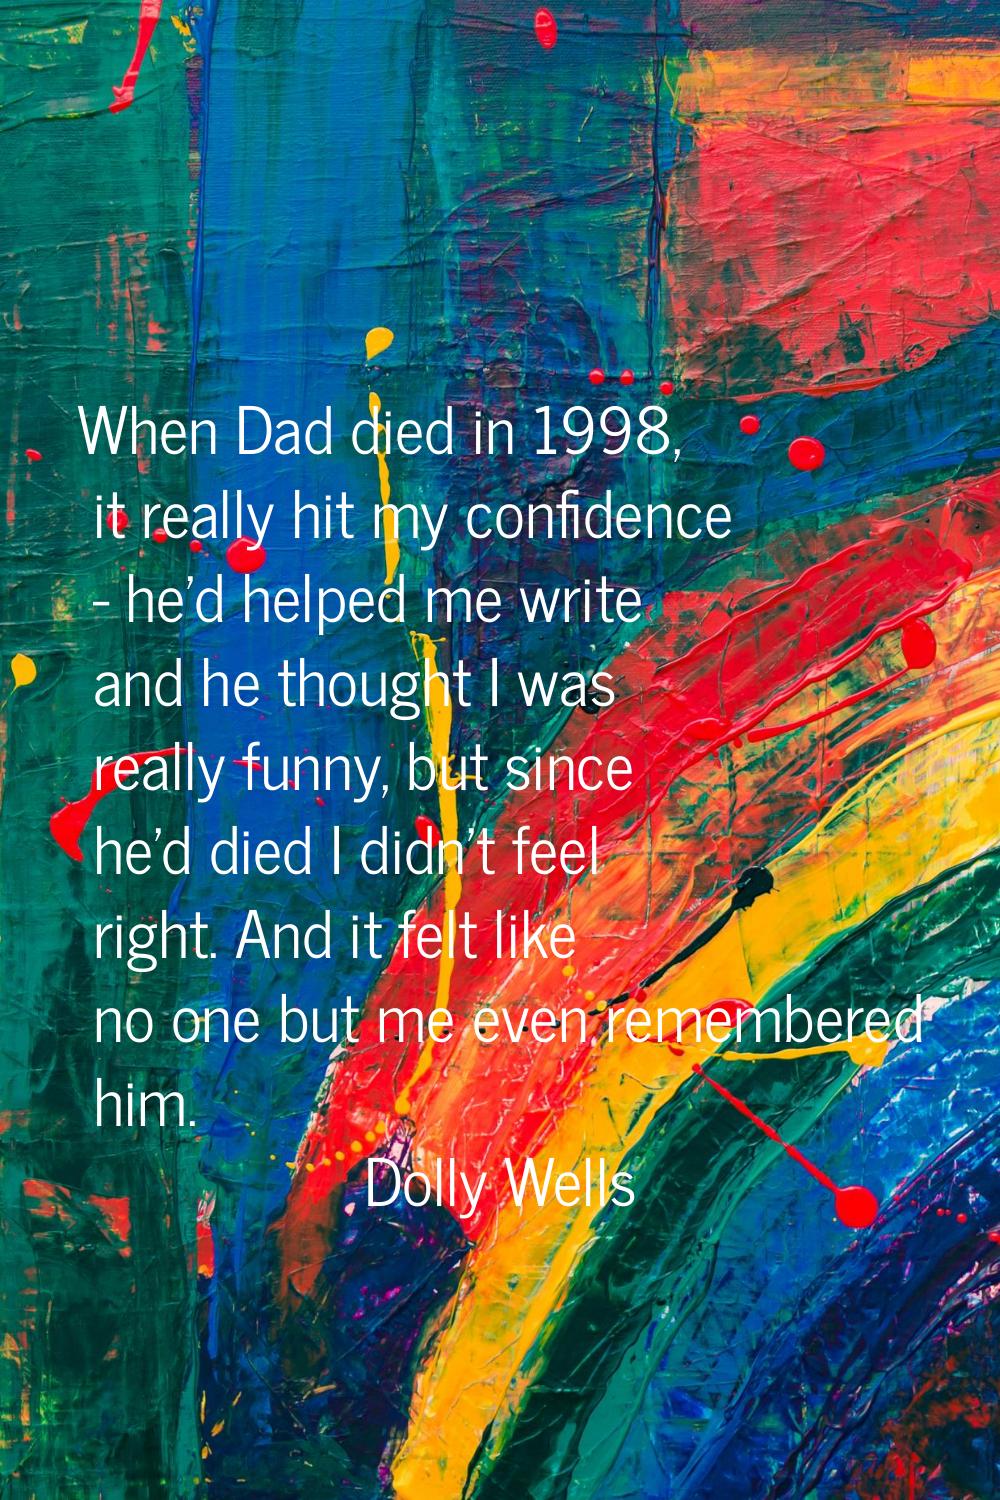 When Dad died in 1998, it really hit my confidence - he'd helped me write and he thought I was real